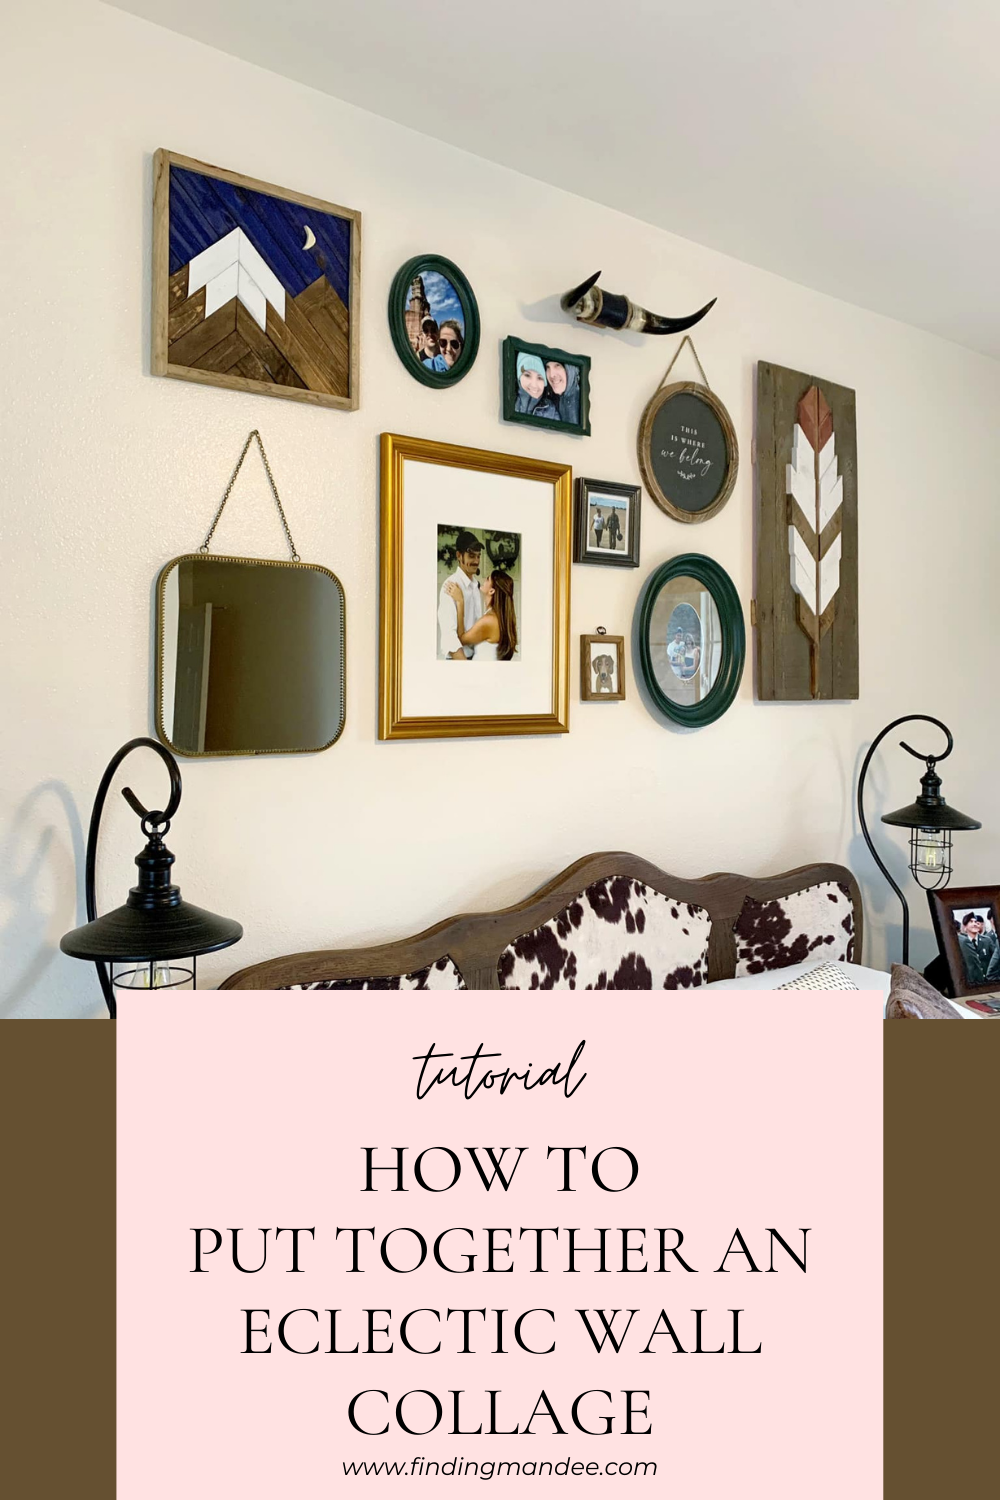 How to Put Together an Eclectic Wall Collage | Finding Mandee